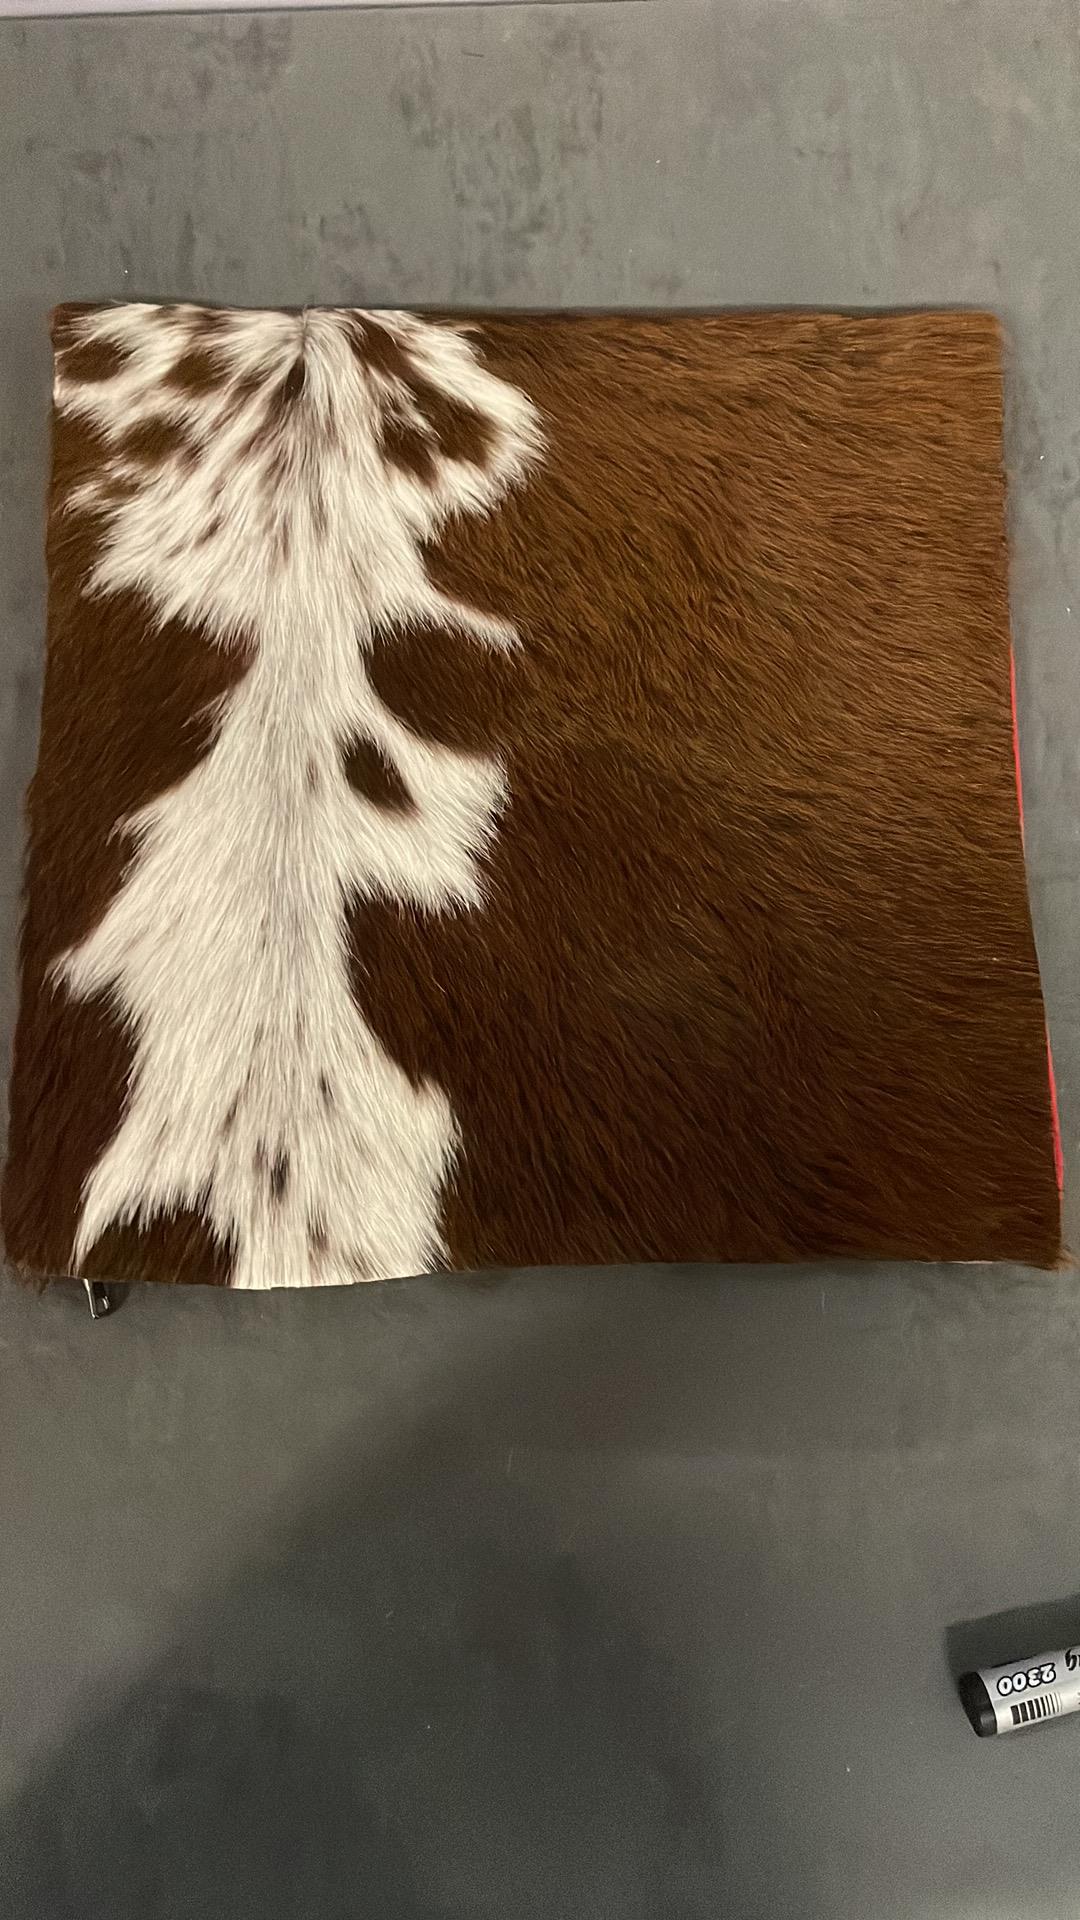 A Pair Cushion Cowhide Leather Cushion Cover 100% Natural Hide Handmade Cover With A Red Velour Back - Image 6 of 6